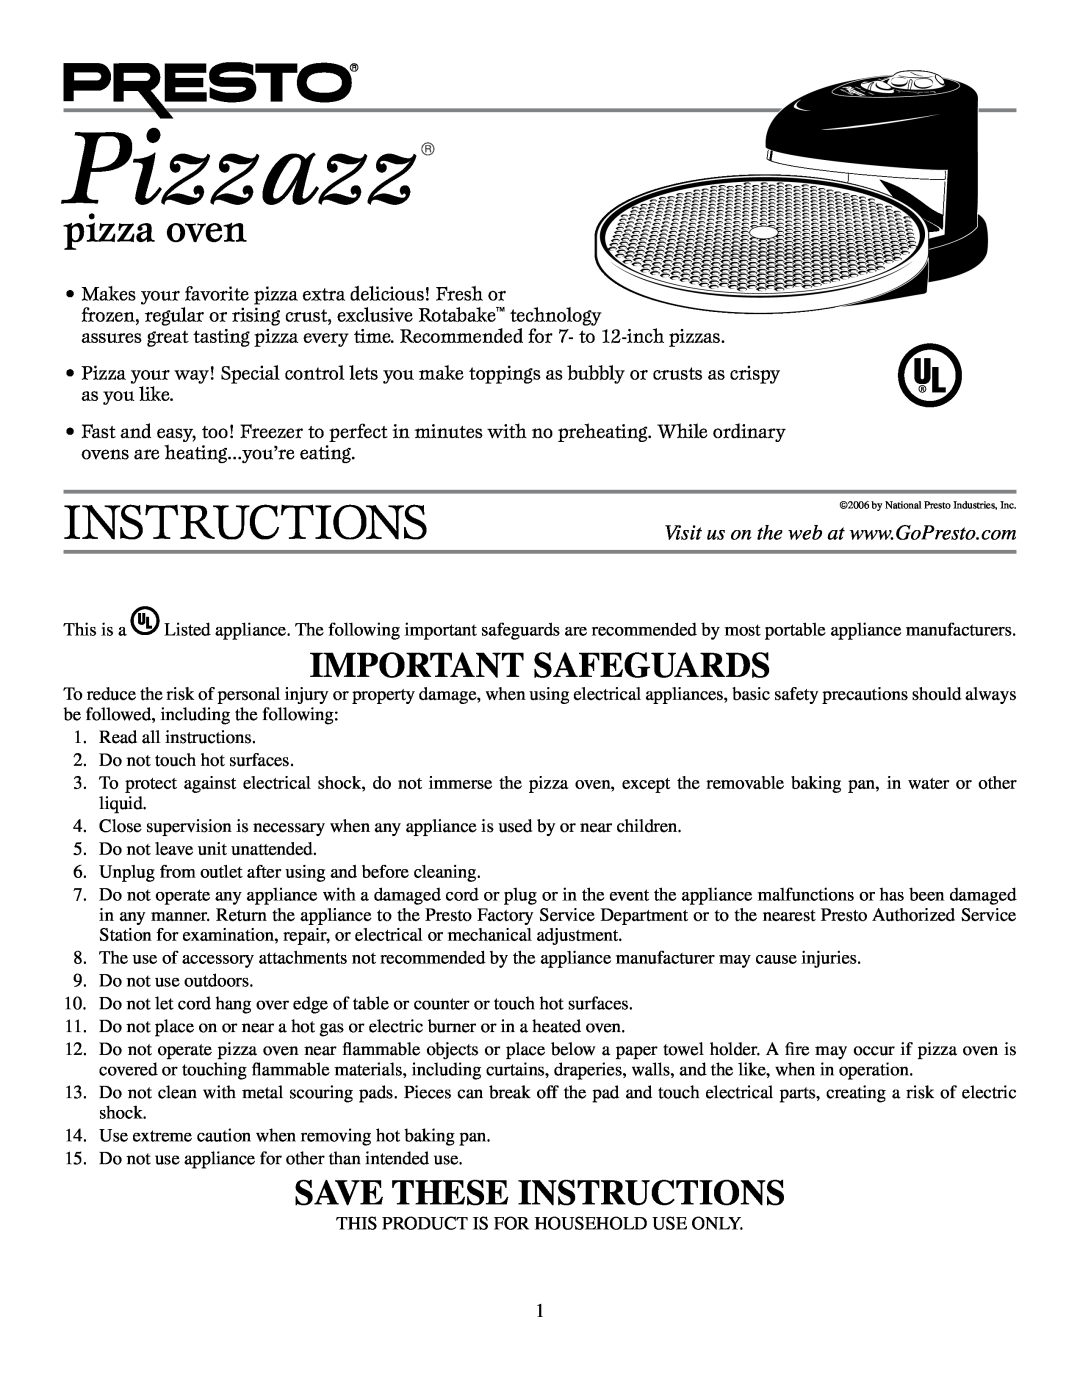 Presto Kitchen Utensil manual Pizzazz, pizza oven, Important Safeguards, Save These Instructions 